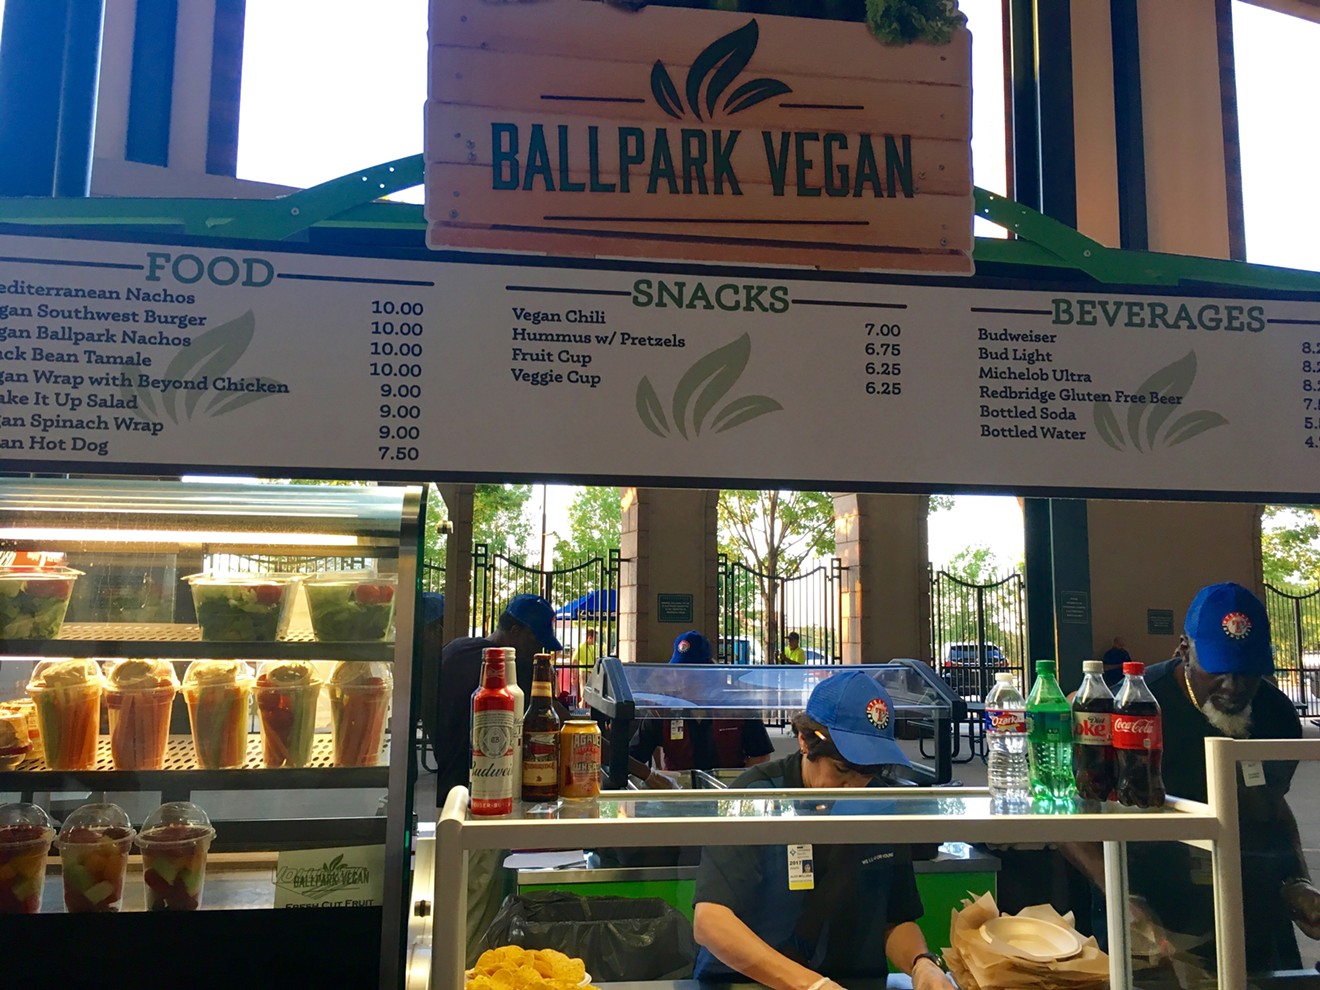 The Ballpark Vegan stand at Globe Life Park proved so popular last year that it came back with even more dishes. PETA recently named Globe Life Park the most vegan-friendly ballpark in the U.S.